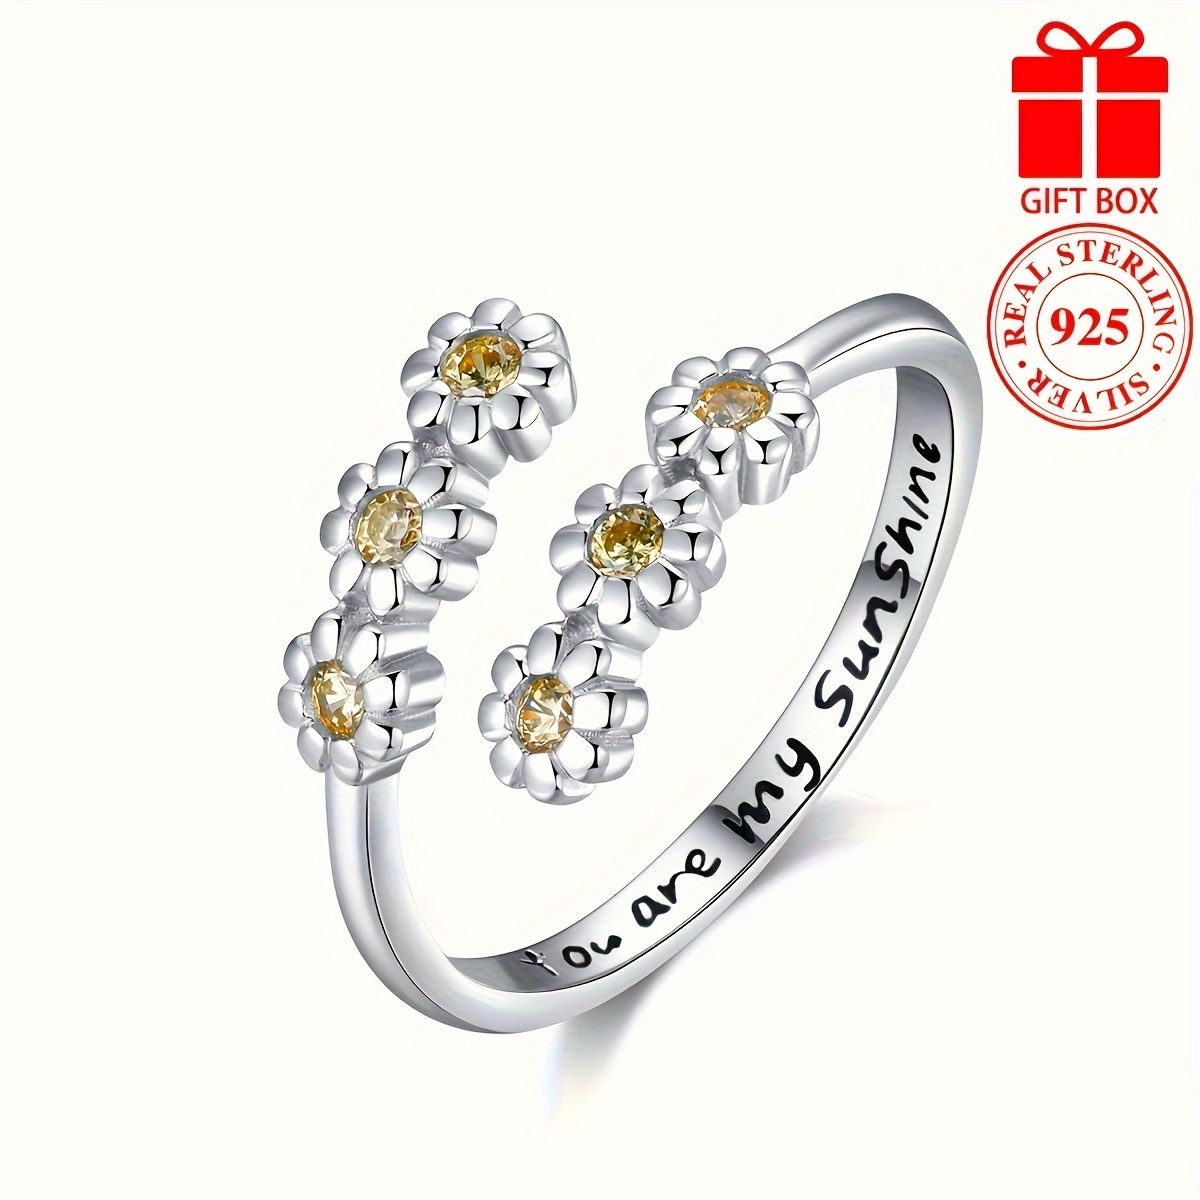 

925 Sterling Silver Wrap Ring Trendy Sunflower Design Inlaid Shining Zirconia Carved Sweet Words Inside High Quality Adjustable Ring